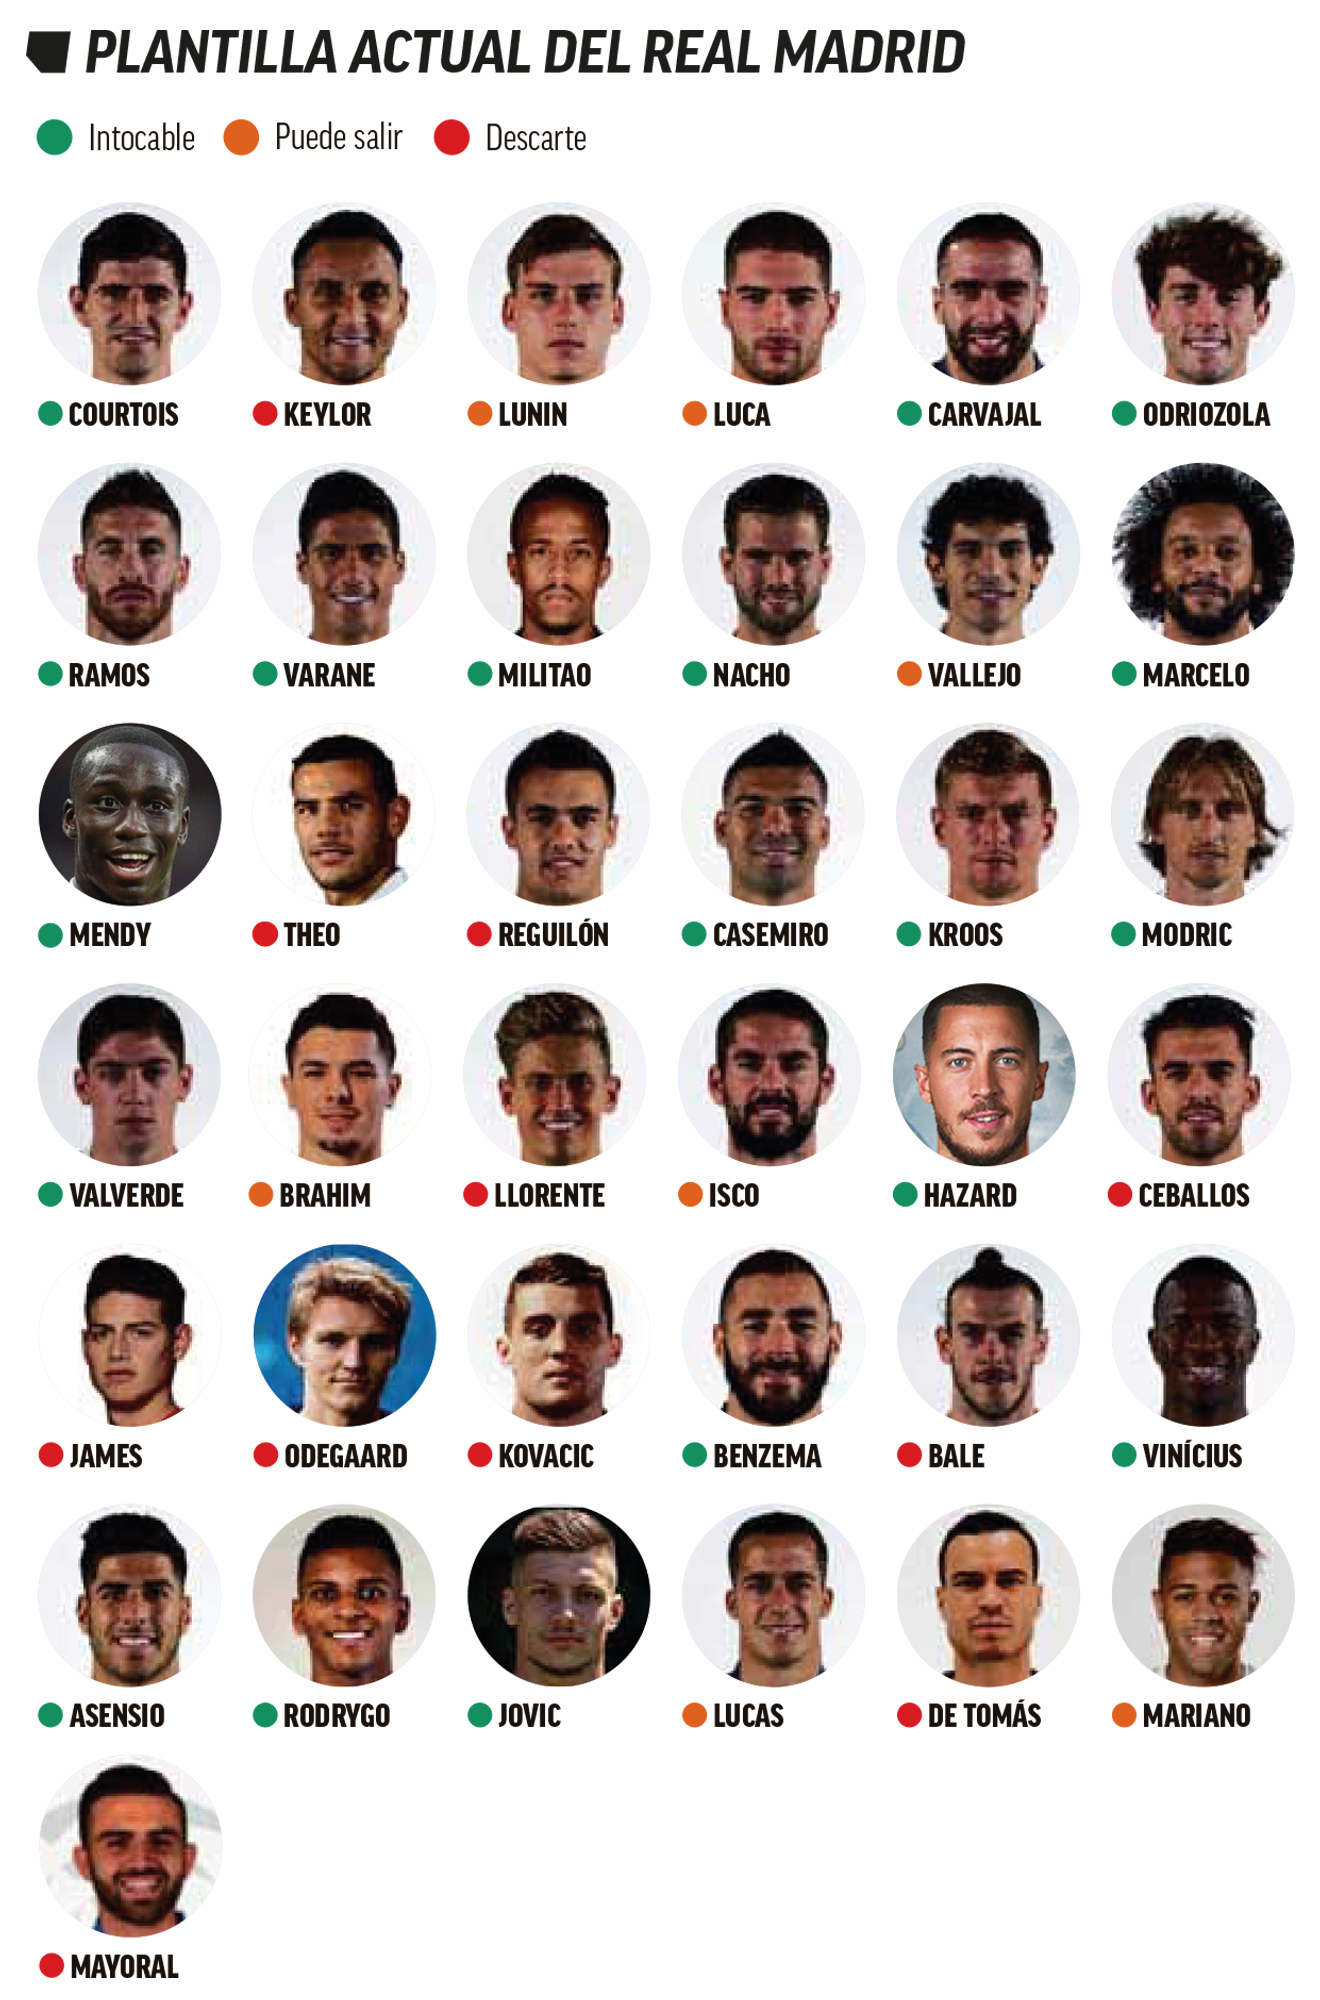 Real Madrid: Real Madrid now have 37 players for their senior